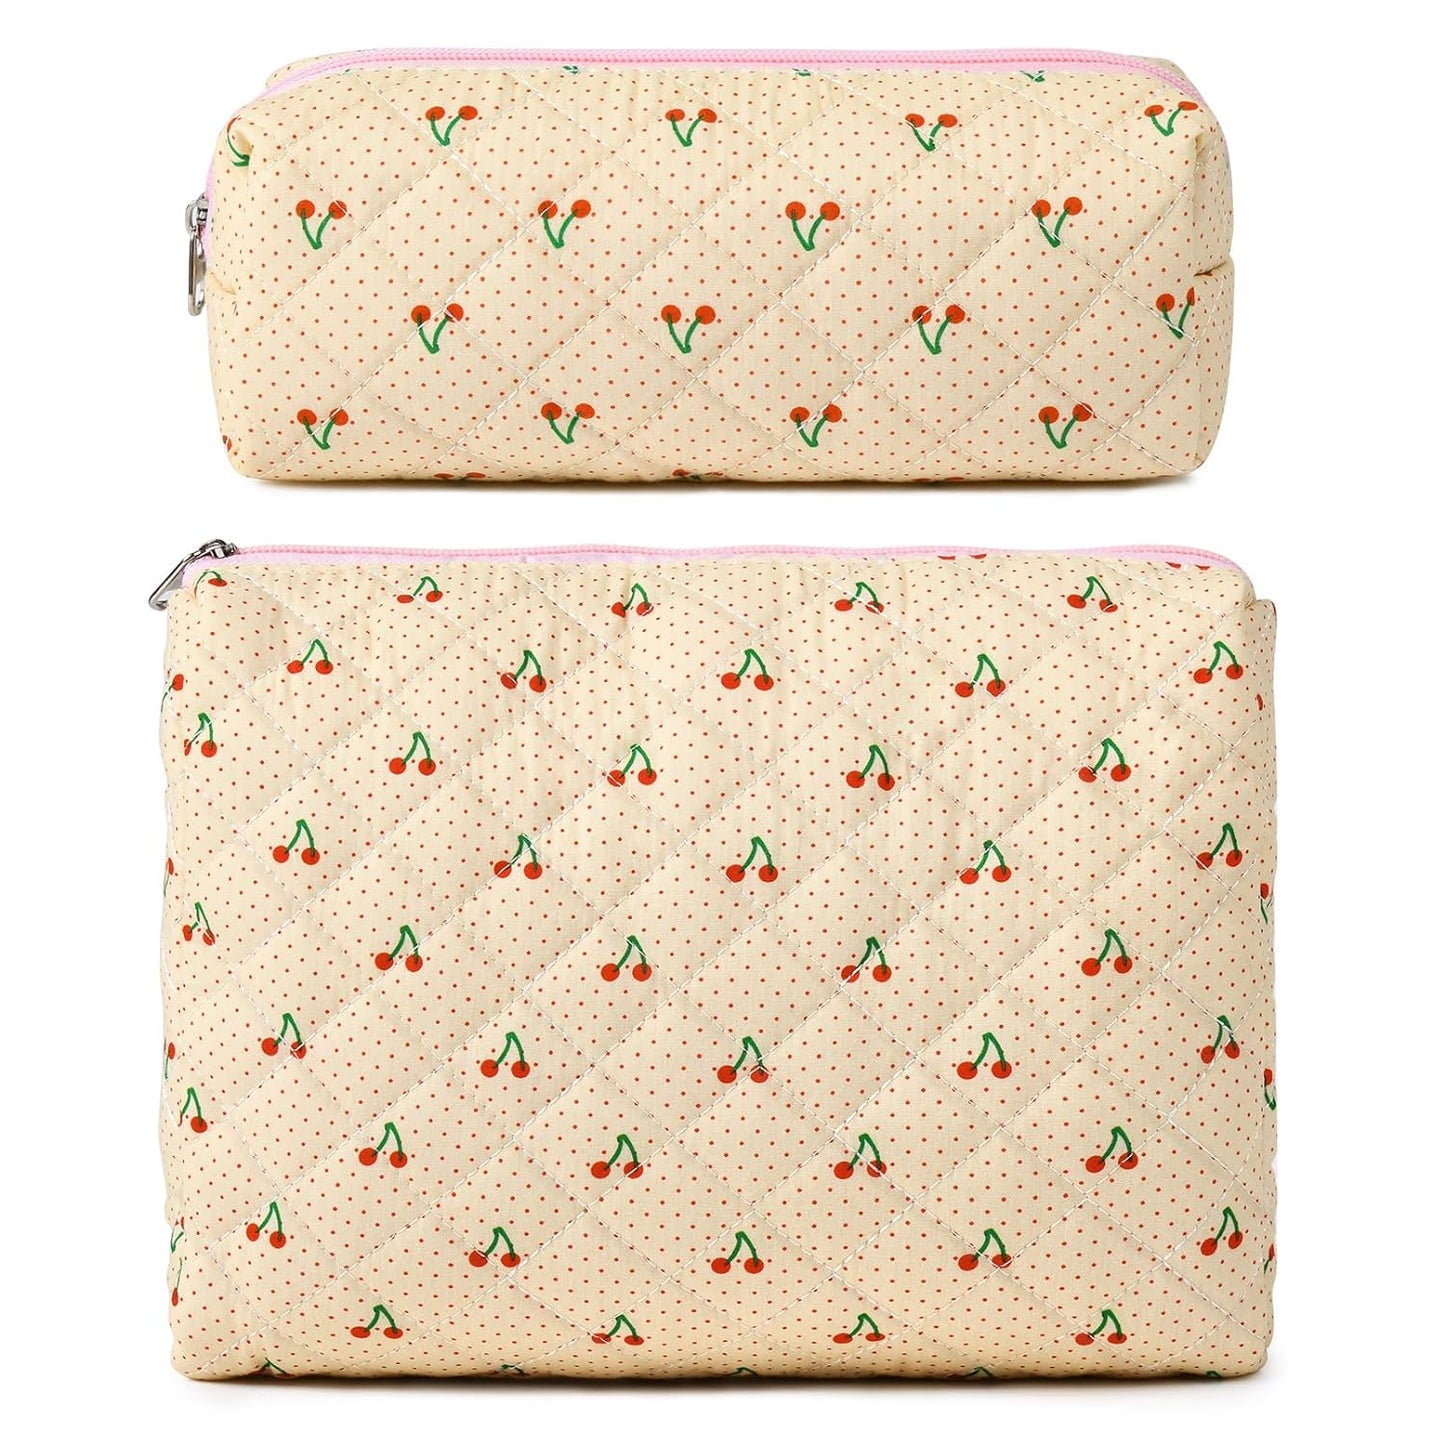 2 Pieces Makeup Bag Large Checkered Cosmetic Bag Pink Capacity Canvas Travel Toiletry Bag Organizer Cute Makeup Brushes Aesthetic Accessories Storage Bag for Women